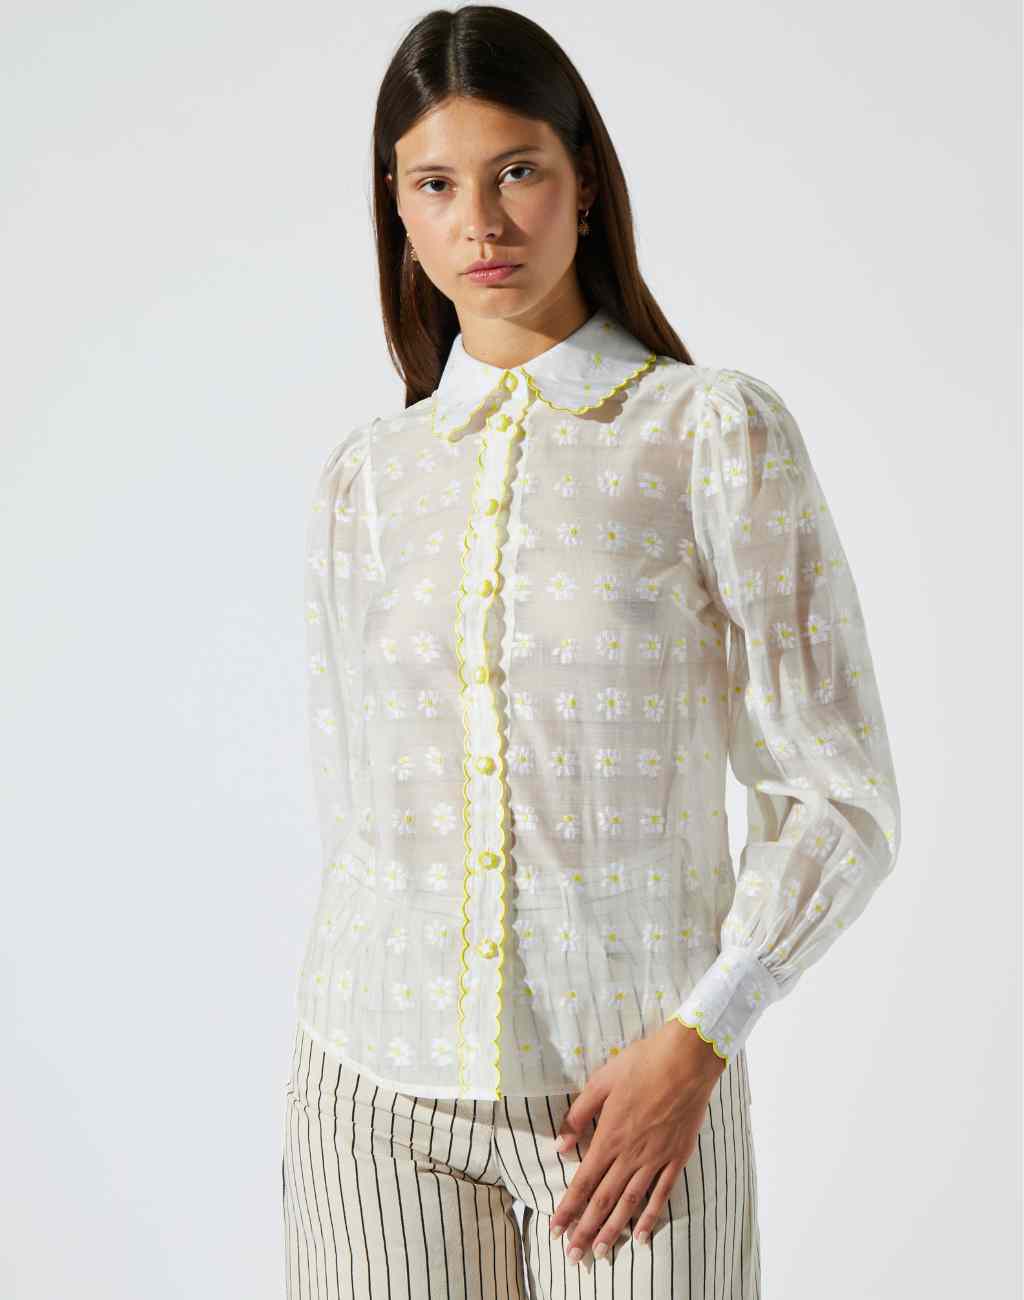 White Blouse with Whimsical Daisy Embroidery and Daisy Buttons